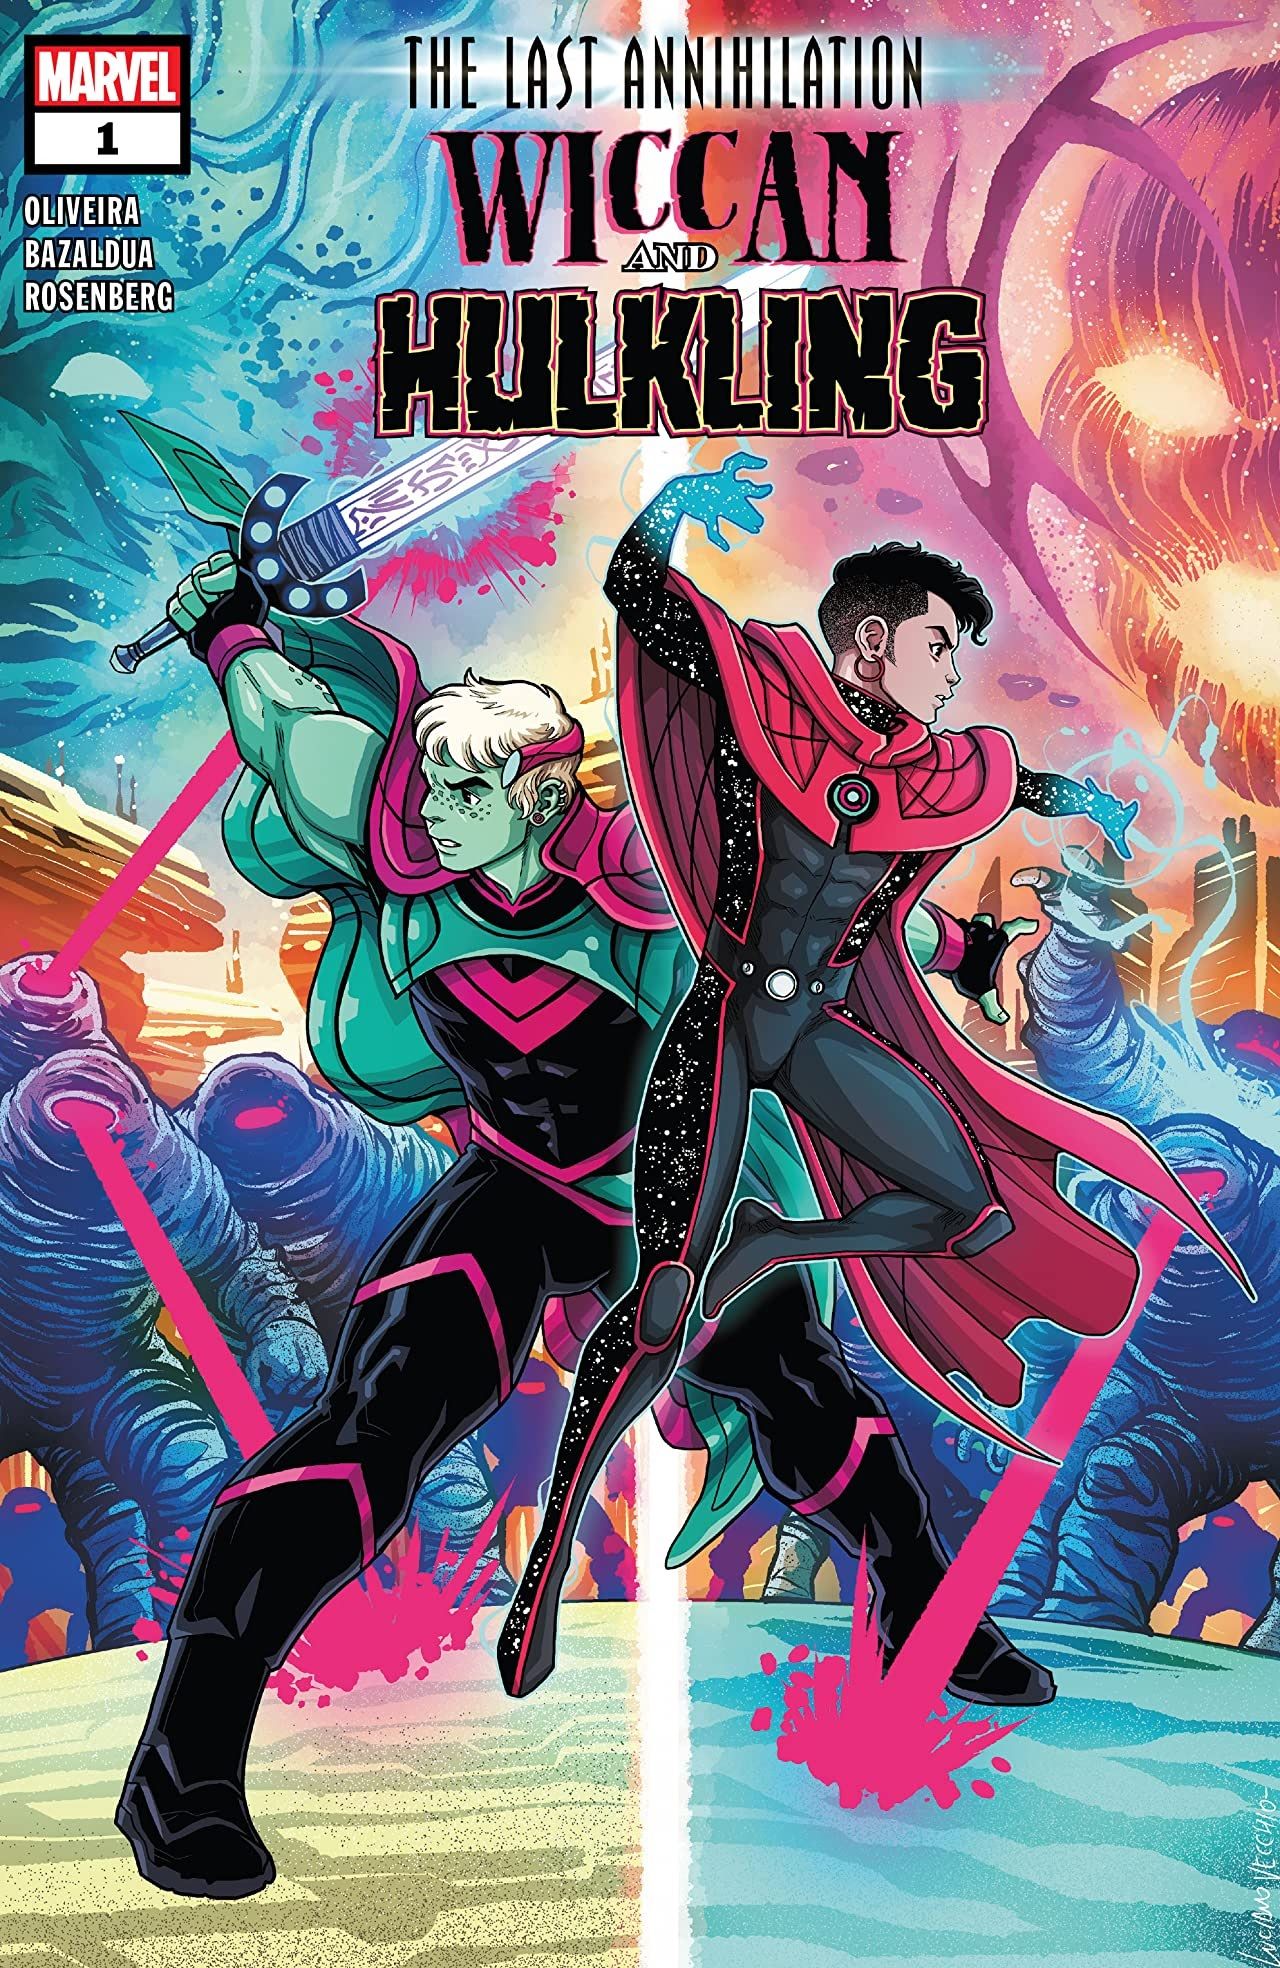 Wiccan and Hulking fight a cosmic army on the cover to Last Annhilation Wiccan and Hulking 1 by Luciano Vecchio